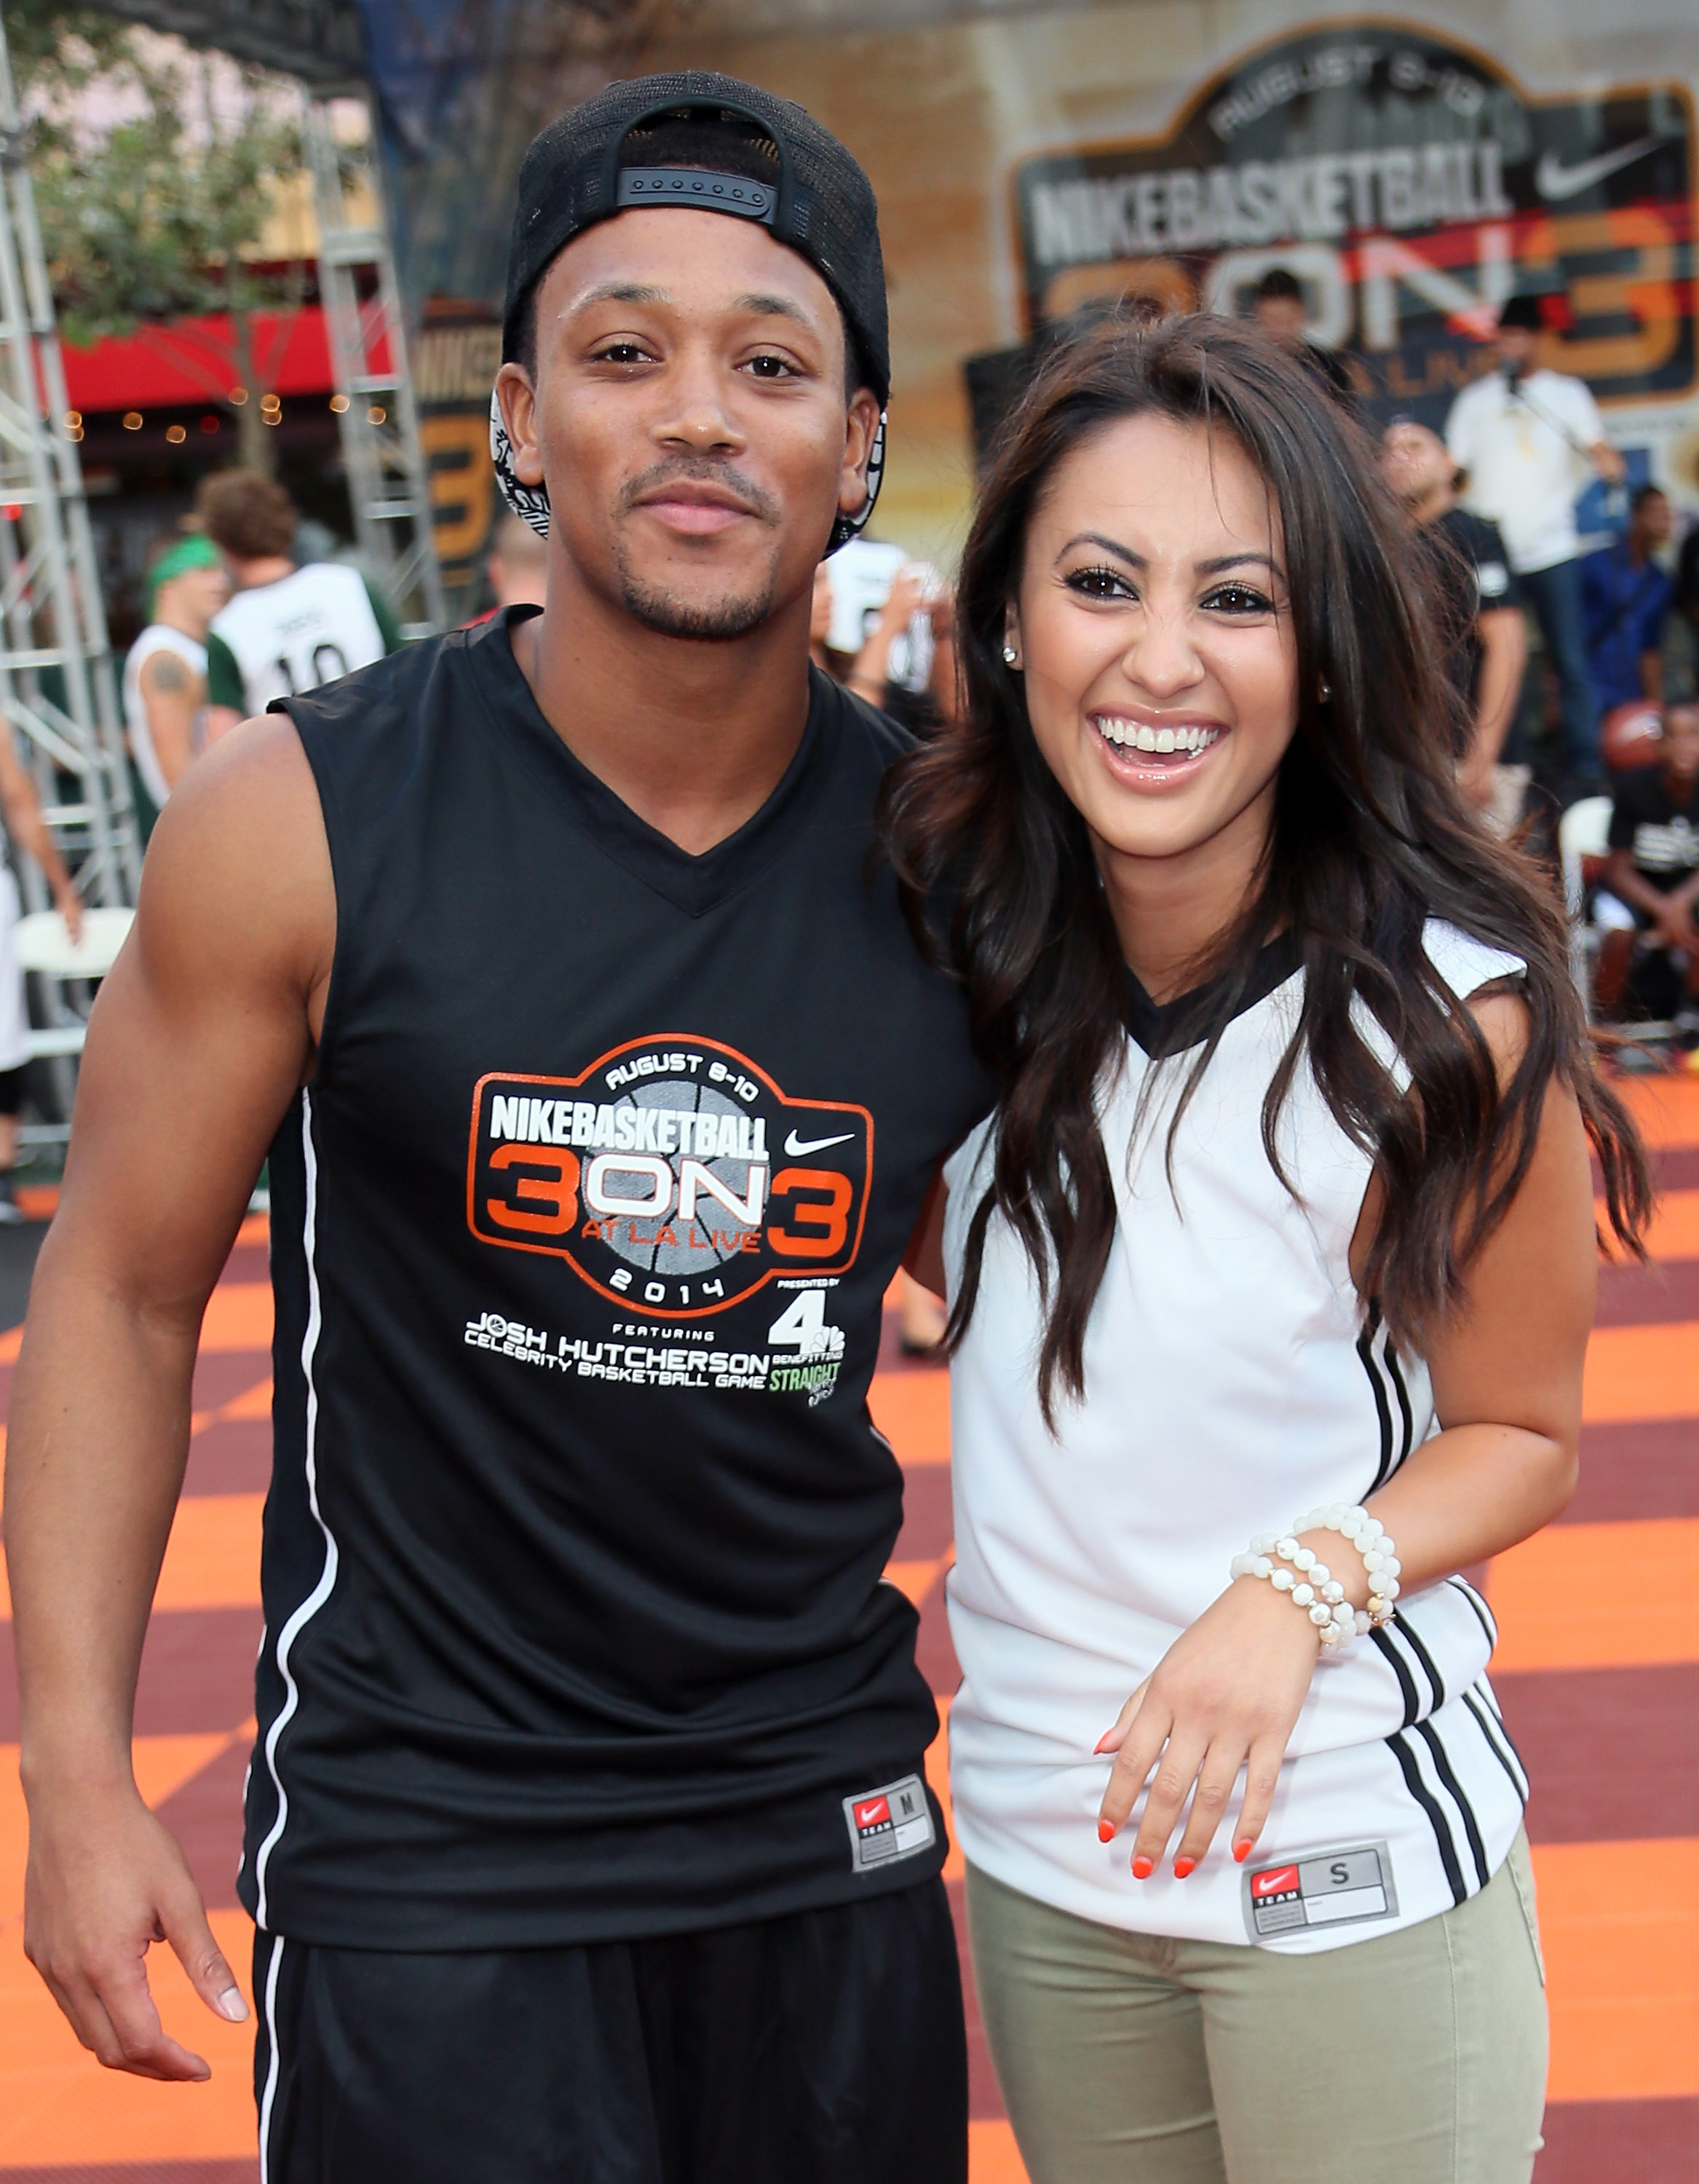 Rapper Romeo Miller and Francia Raisa attend the 3rd Annual Josh Hutcherson Celebrity Basketball Game at Nokia Plaza L.A. LIVE on August 8, 2014, in Los Angeles, California | Source: Getty Images